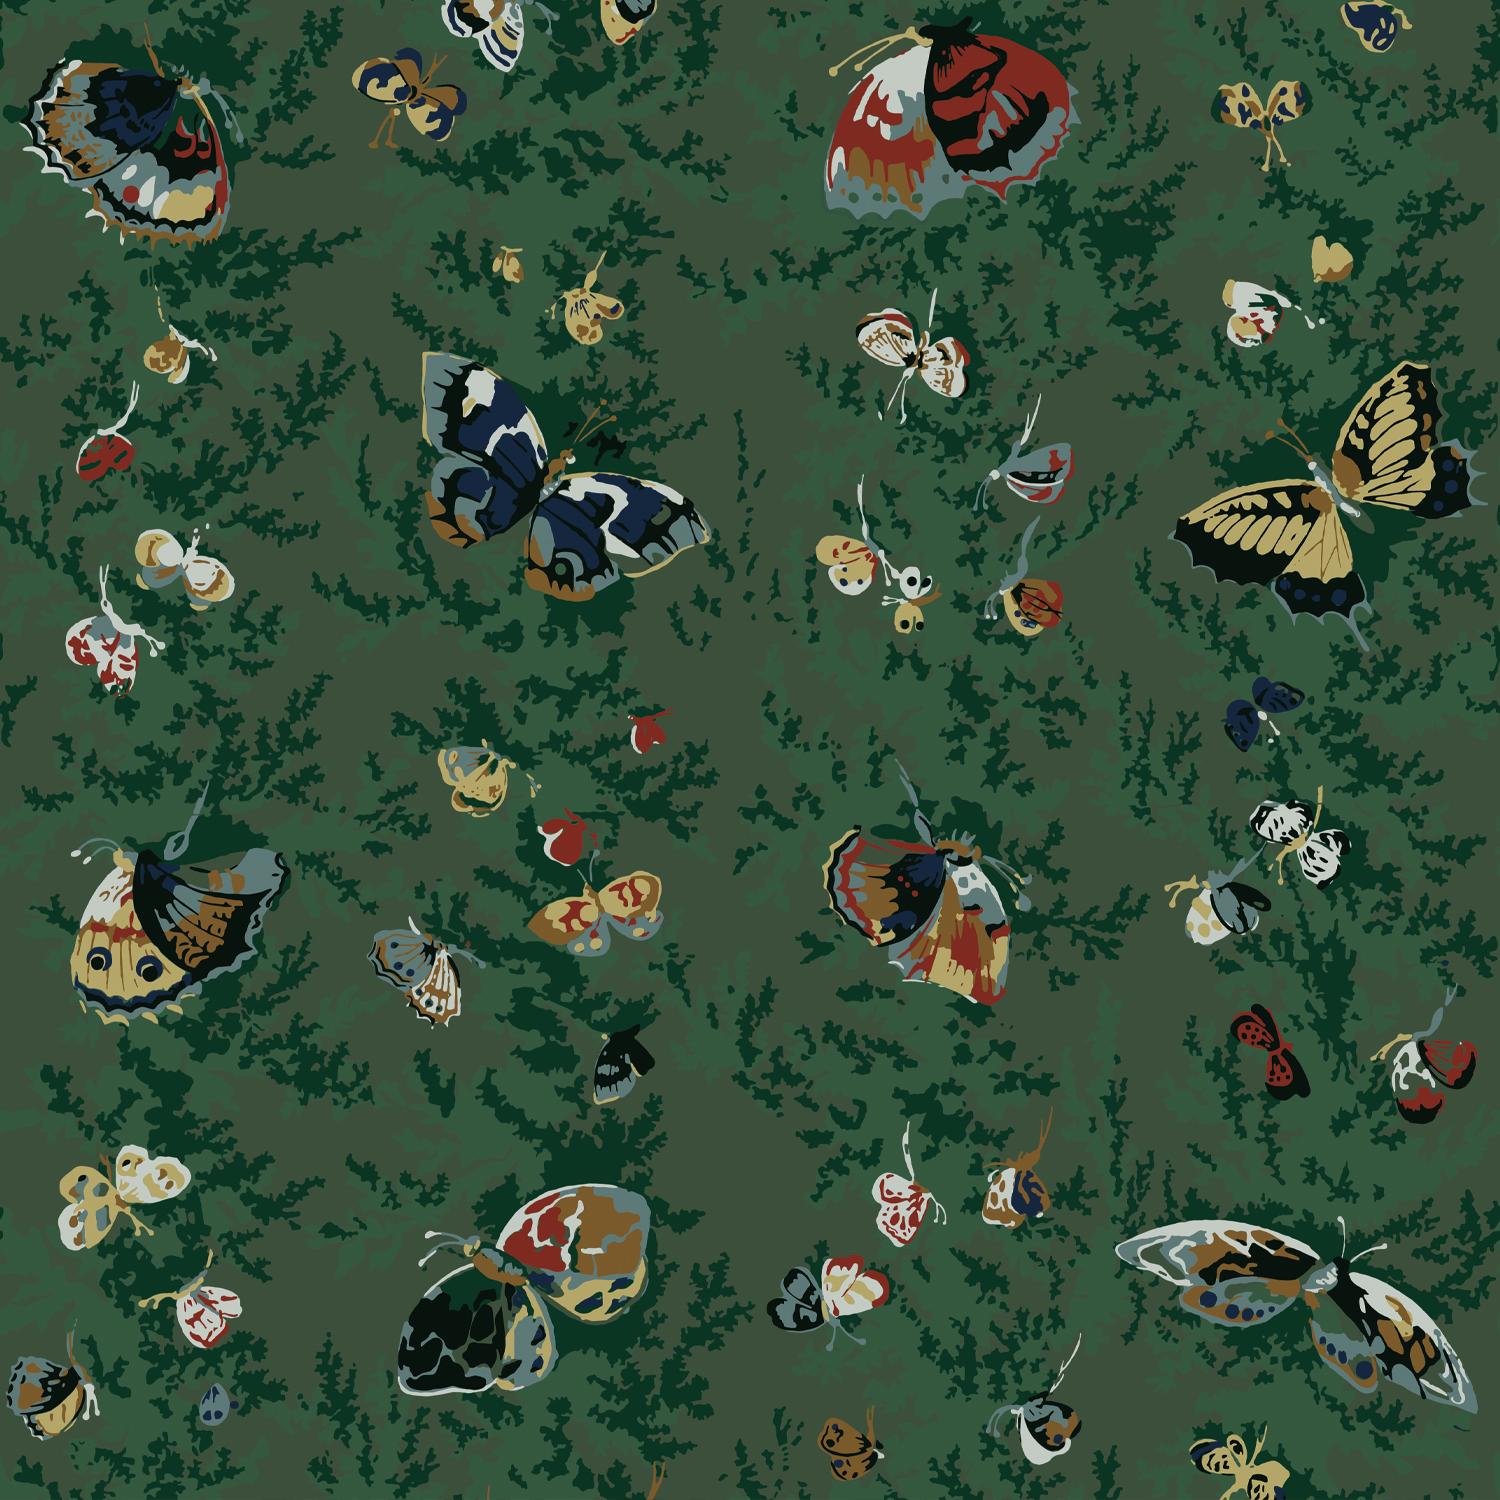 Repeat: 72,5 cm / 28.5 in

Founded in 2019, the French wallpaper brand Papier Francais is defined by the rediscovery, restoration, and revival of iconic wallpapers dating back to the French “Golden Age of wallpaper” of the 18th and 19th centuries.